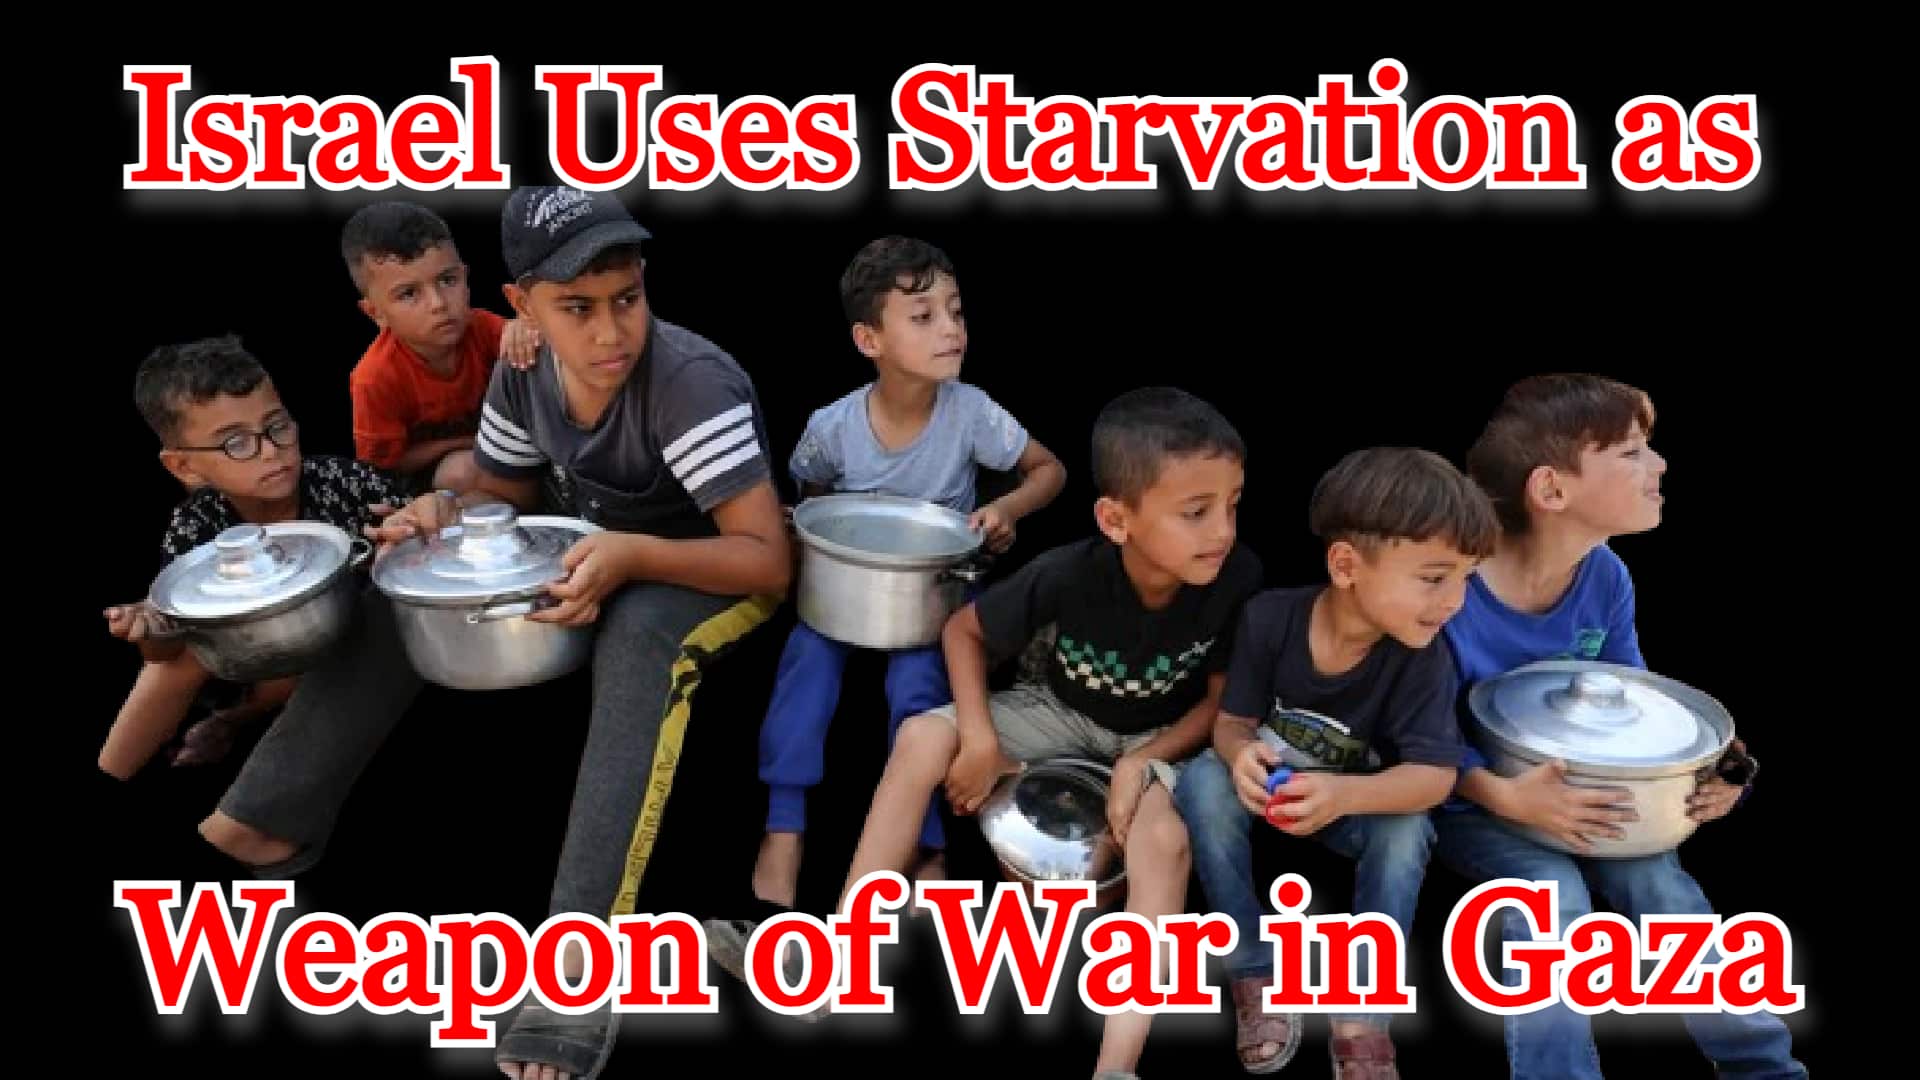 COI #515: Israel Uses Starvation as Weapon of War in Gaza